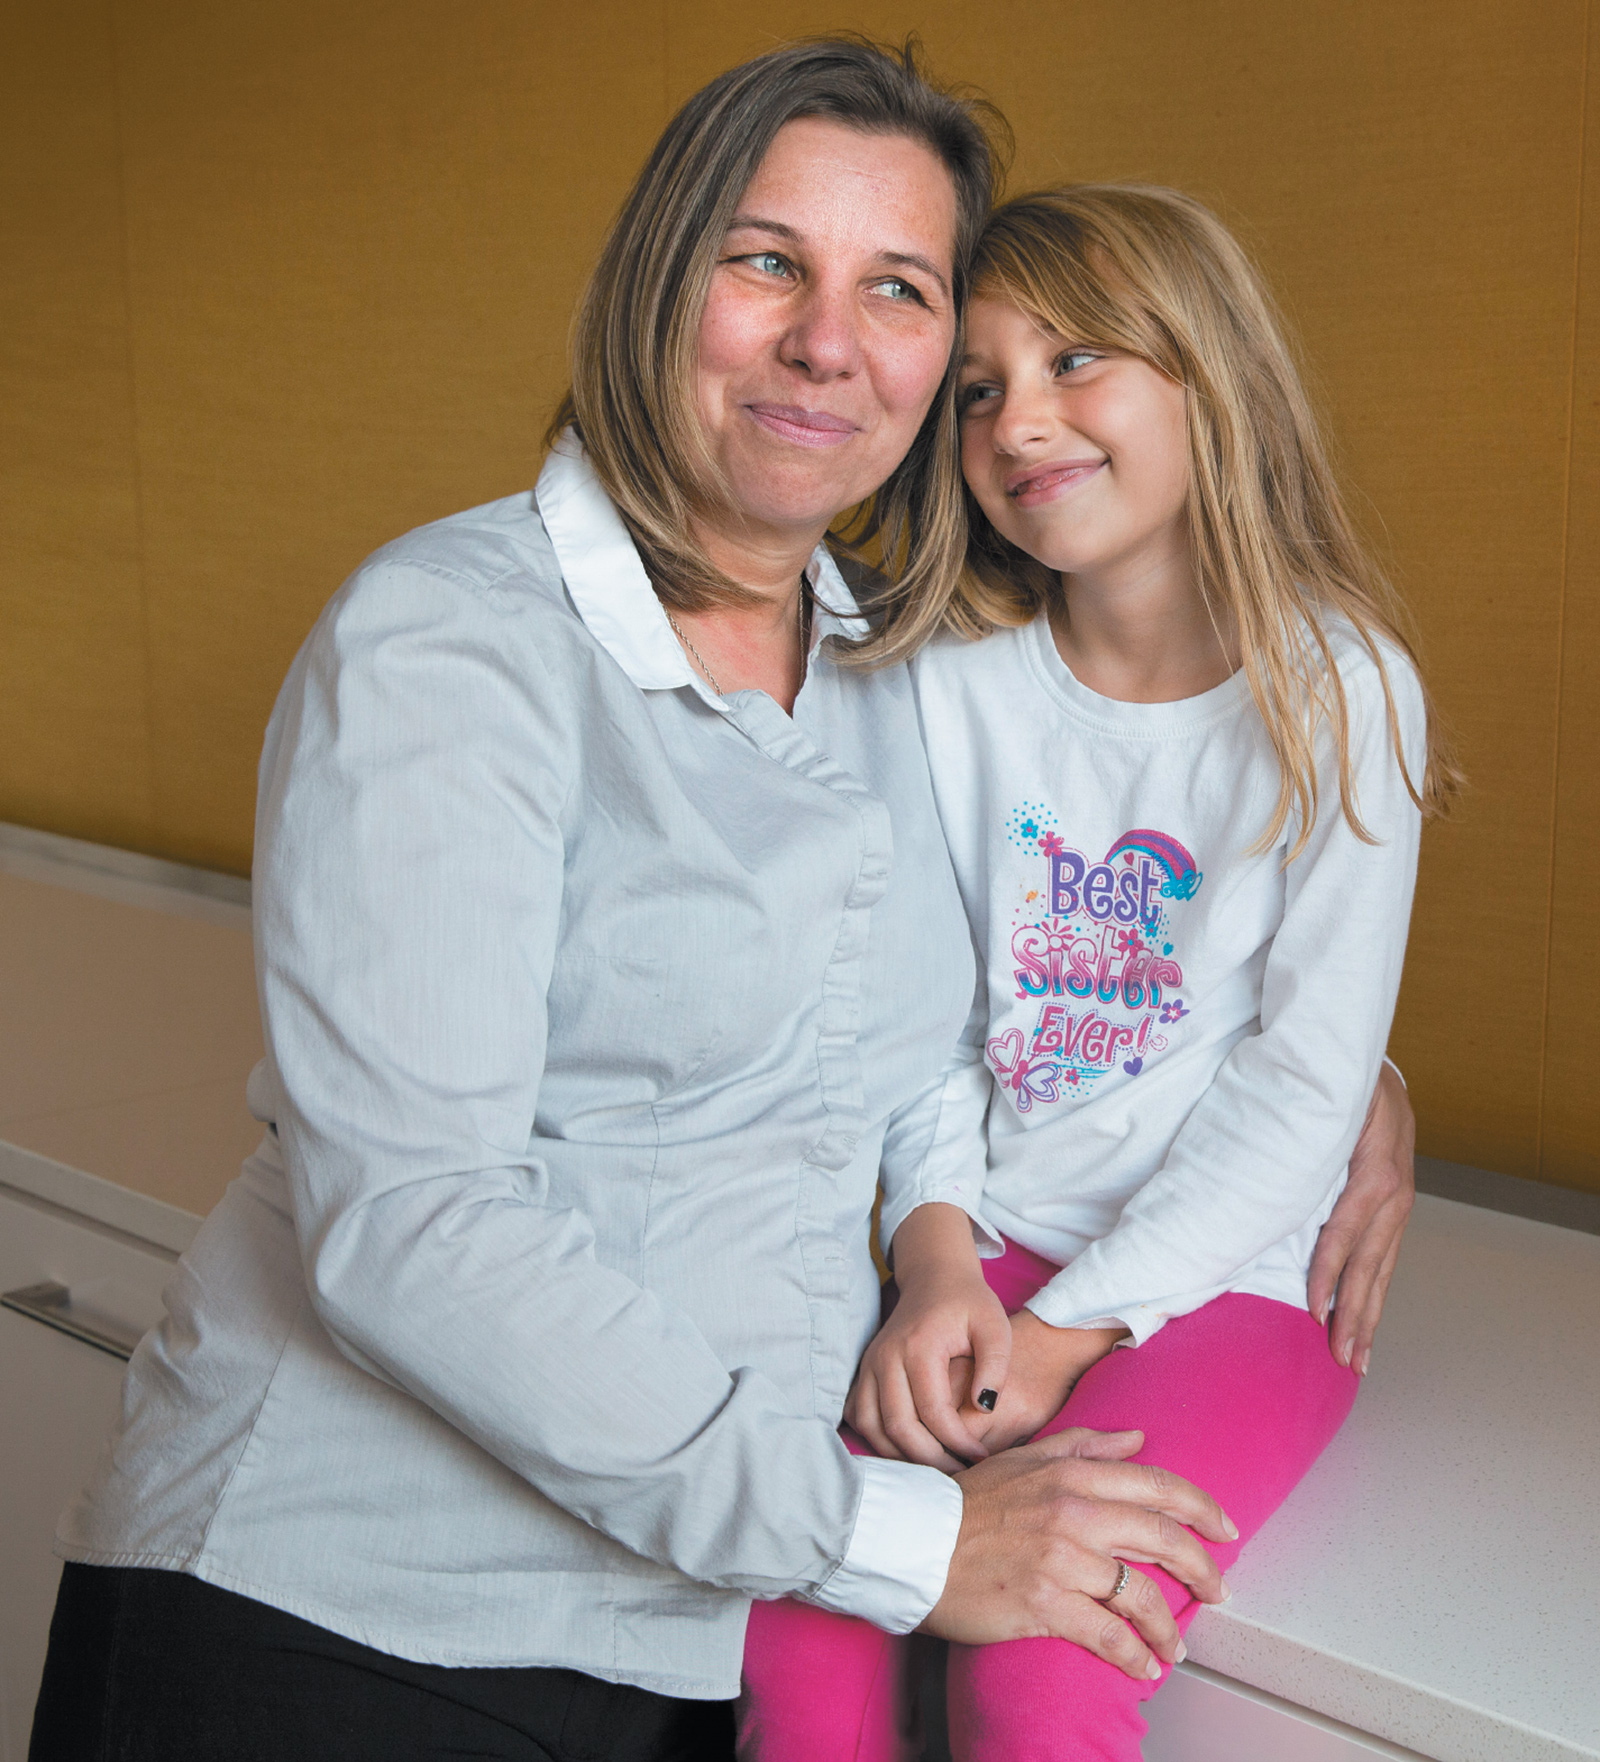 Peggy Young, a former UPS employee who lost her health insurance when the company refused her temporary medical request to avoid lifting heavy packages during her pregnancy, with her daughter Triniti, who was seven years old when Young’s case finally reached the Supreme Court, Washington, D.C., November 2014